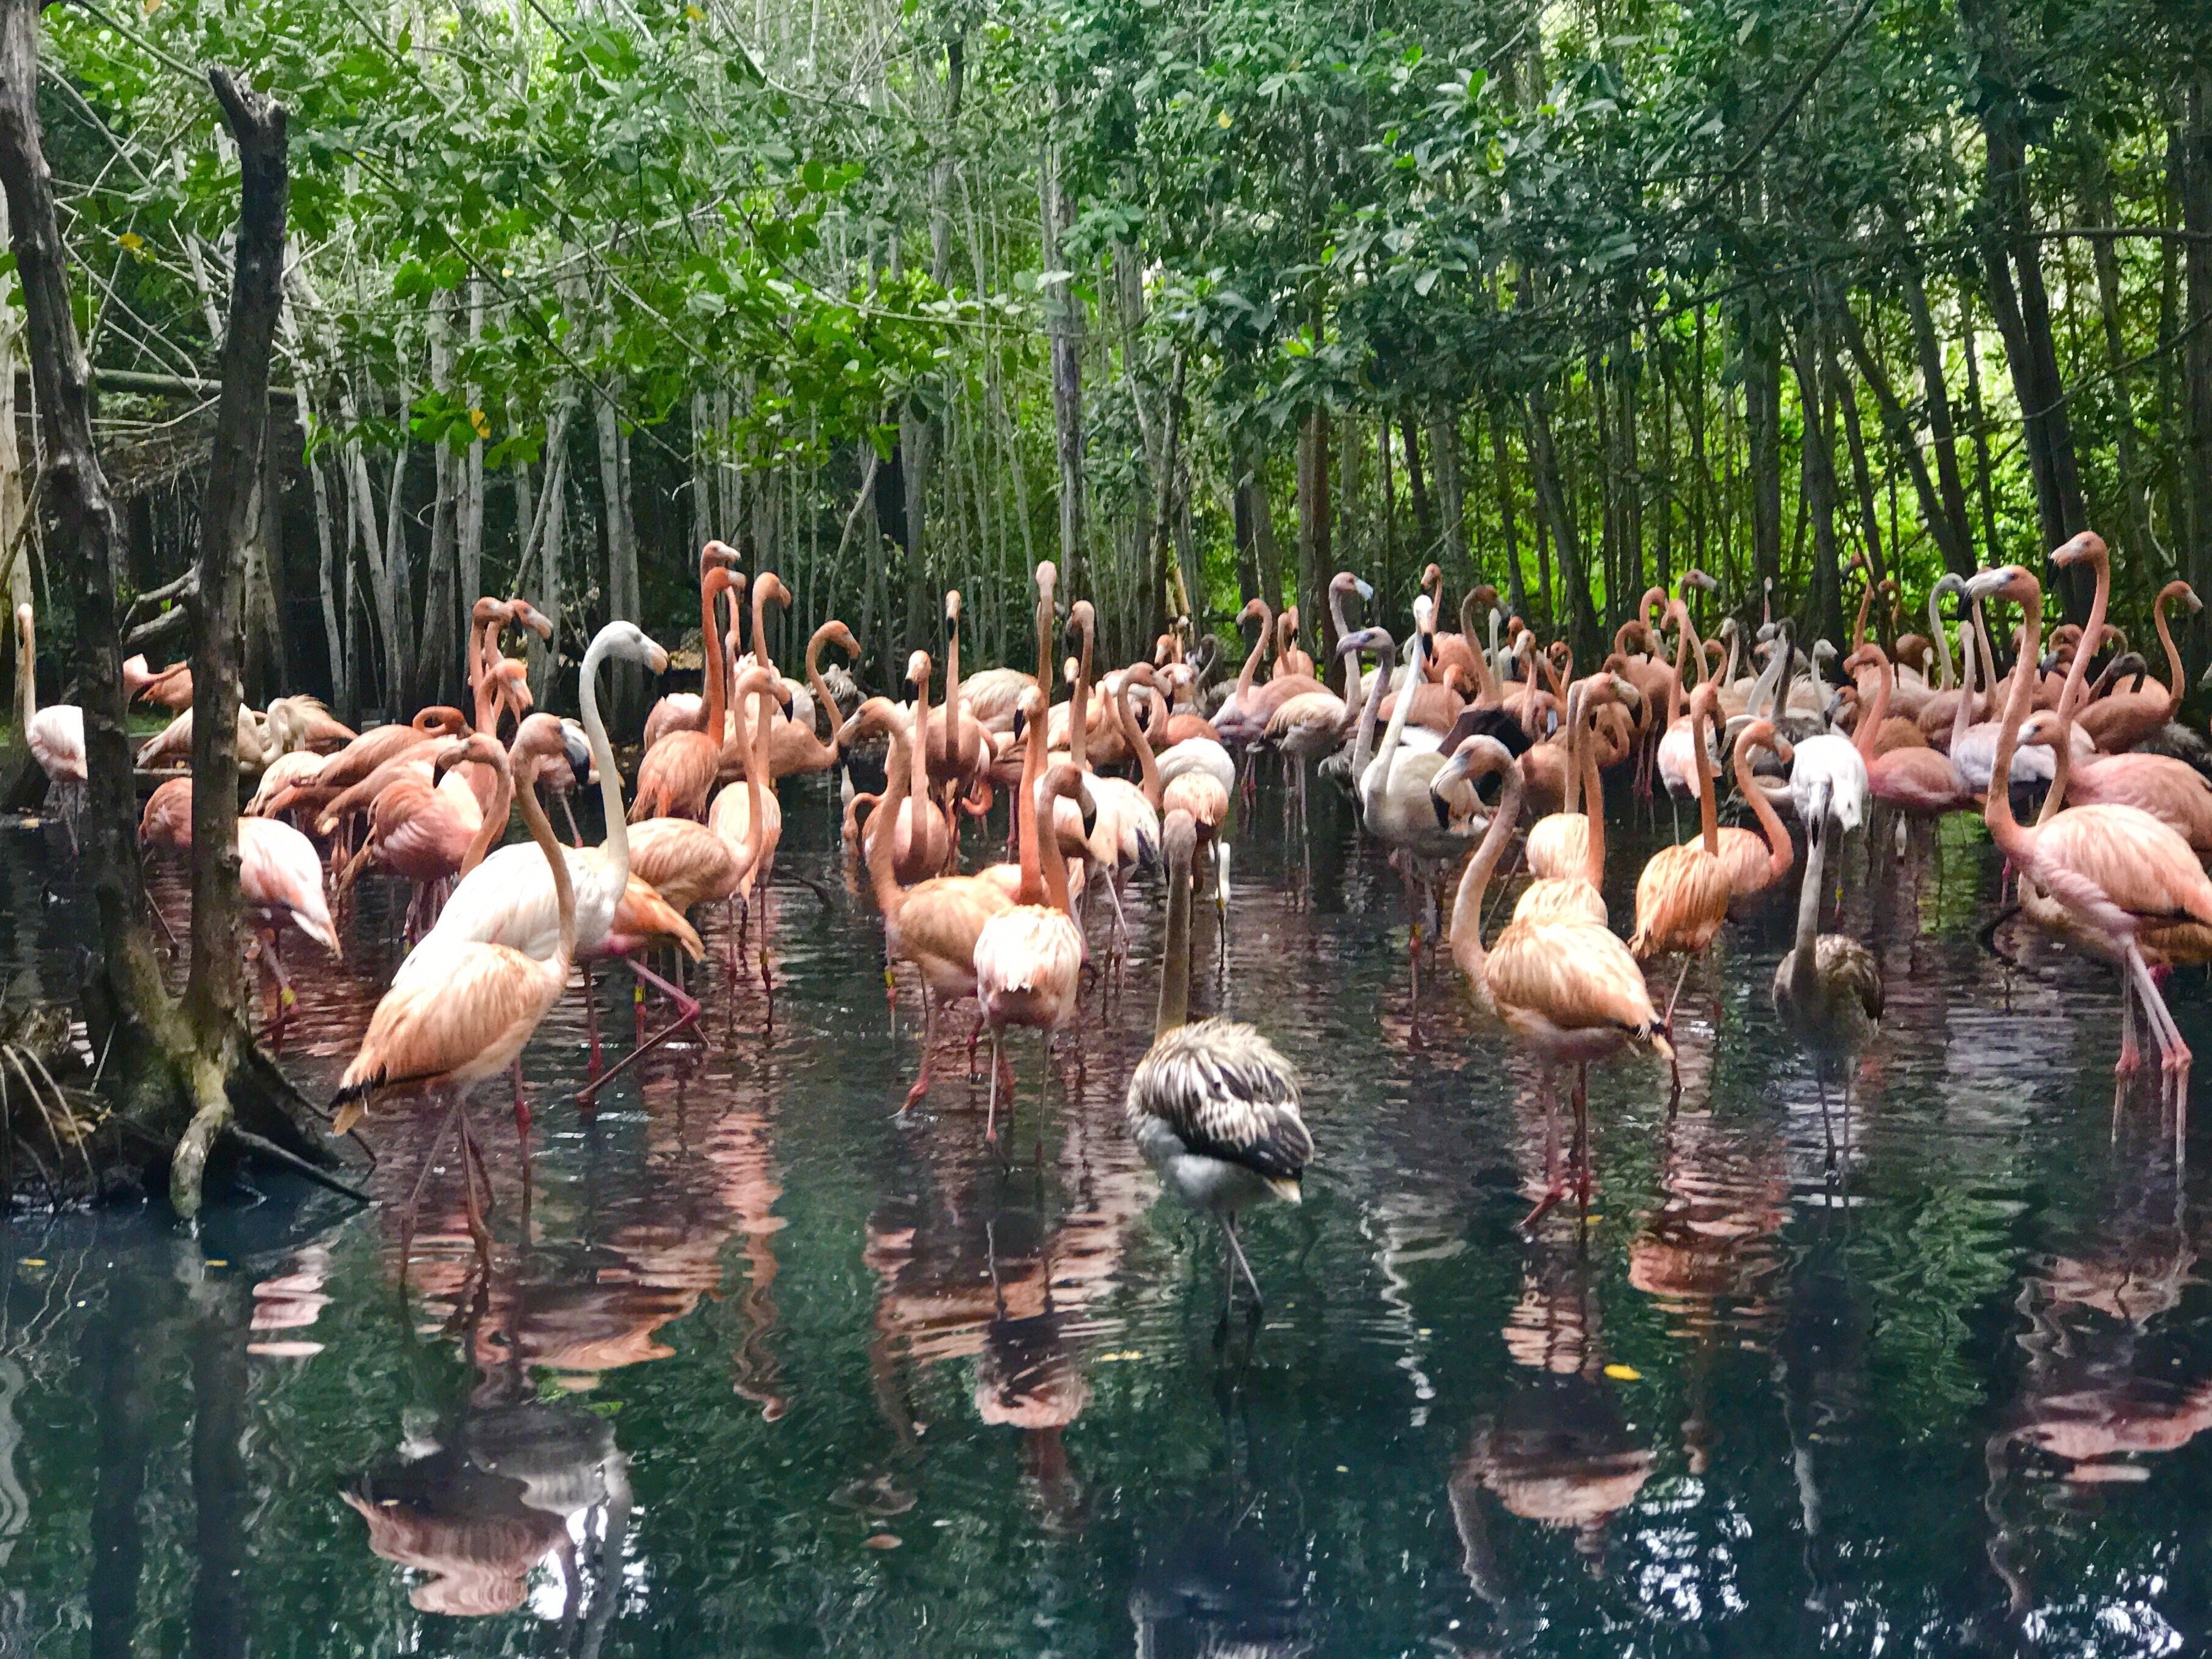 This was one of my favorite pictures from my trip to Cartagena. We hired a guide for the day and he took us out to this bird sanctuary. We would have never found this place or even have stopped had it not been for our guide. It ended up being one of my favorite things from the trip. #ontheroad